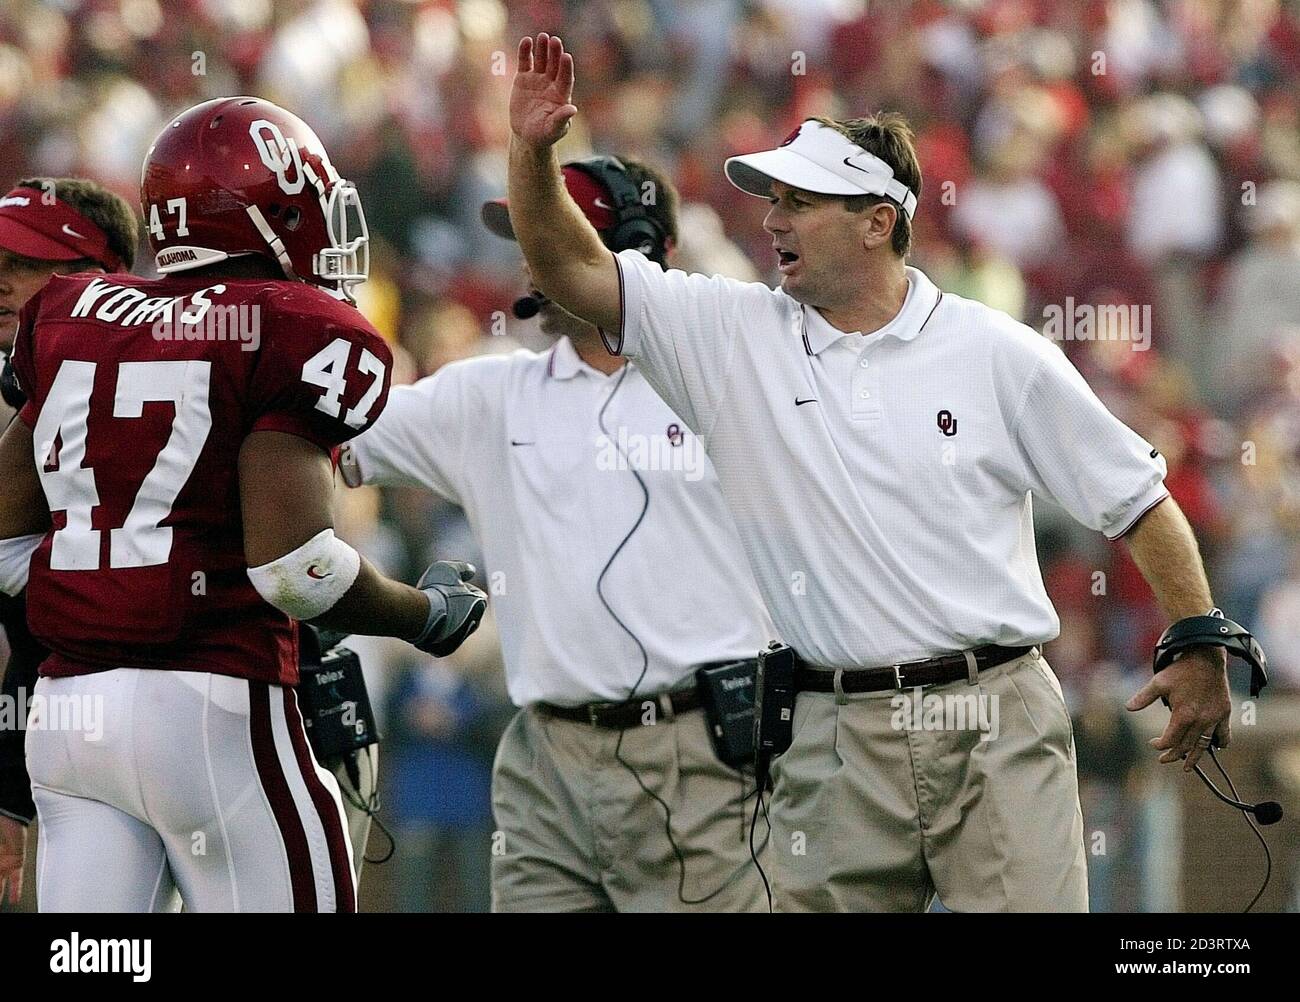 University of Oklahoma Sooners head coach Bob Stoops (R) cheers his team as  Sooners running back Renaldo Works leaves the field during second half  action at Owen Field in Norman, Oklahoma, November